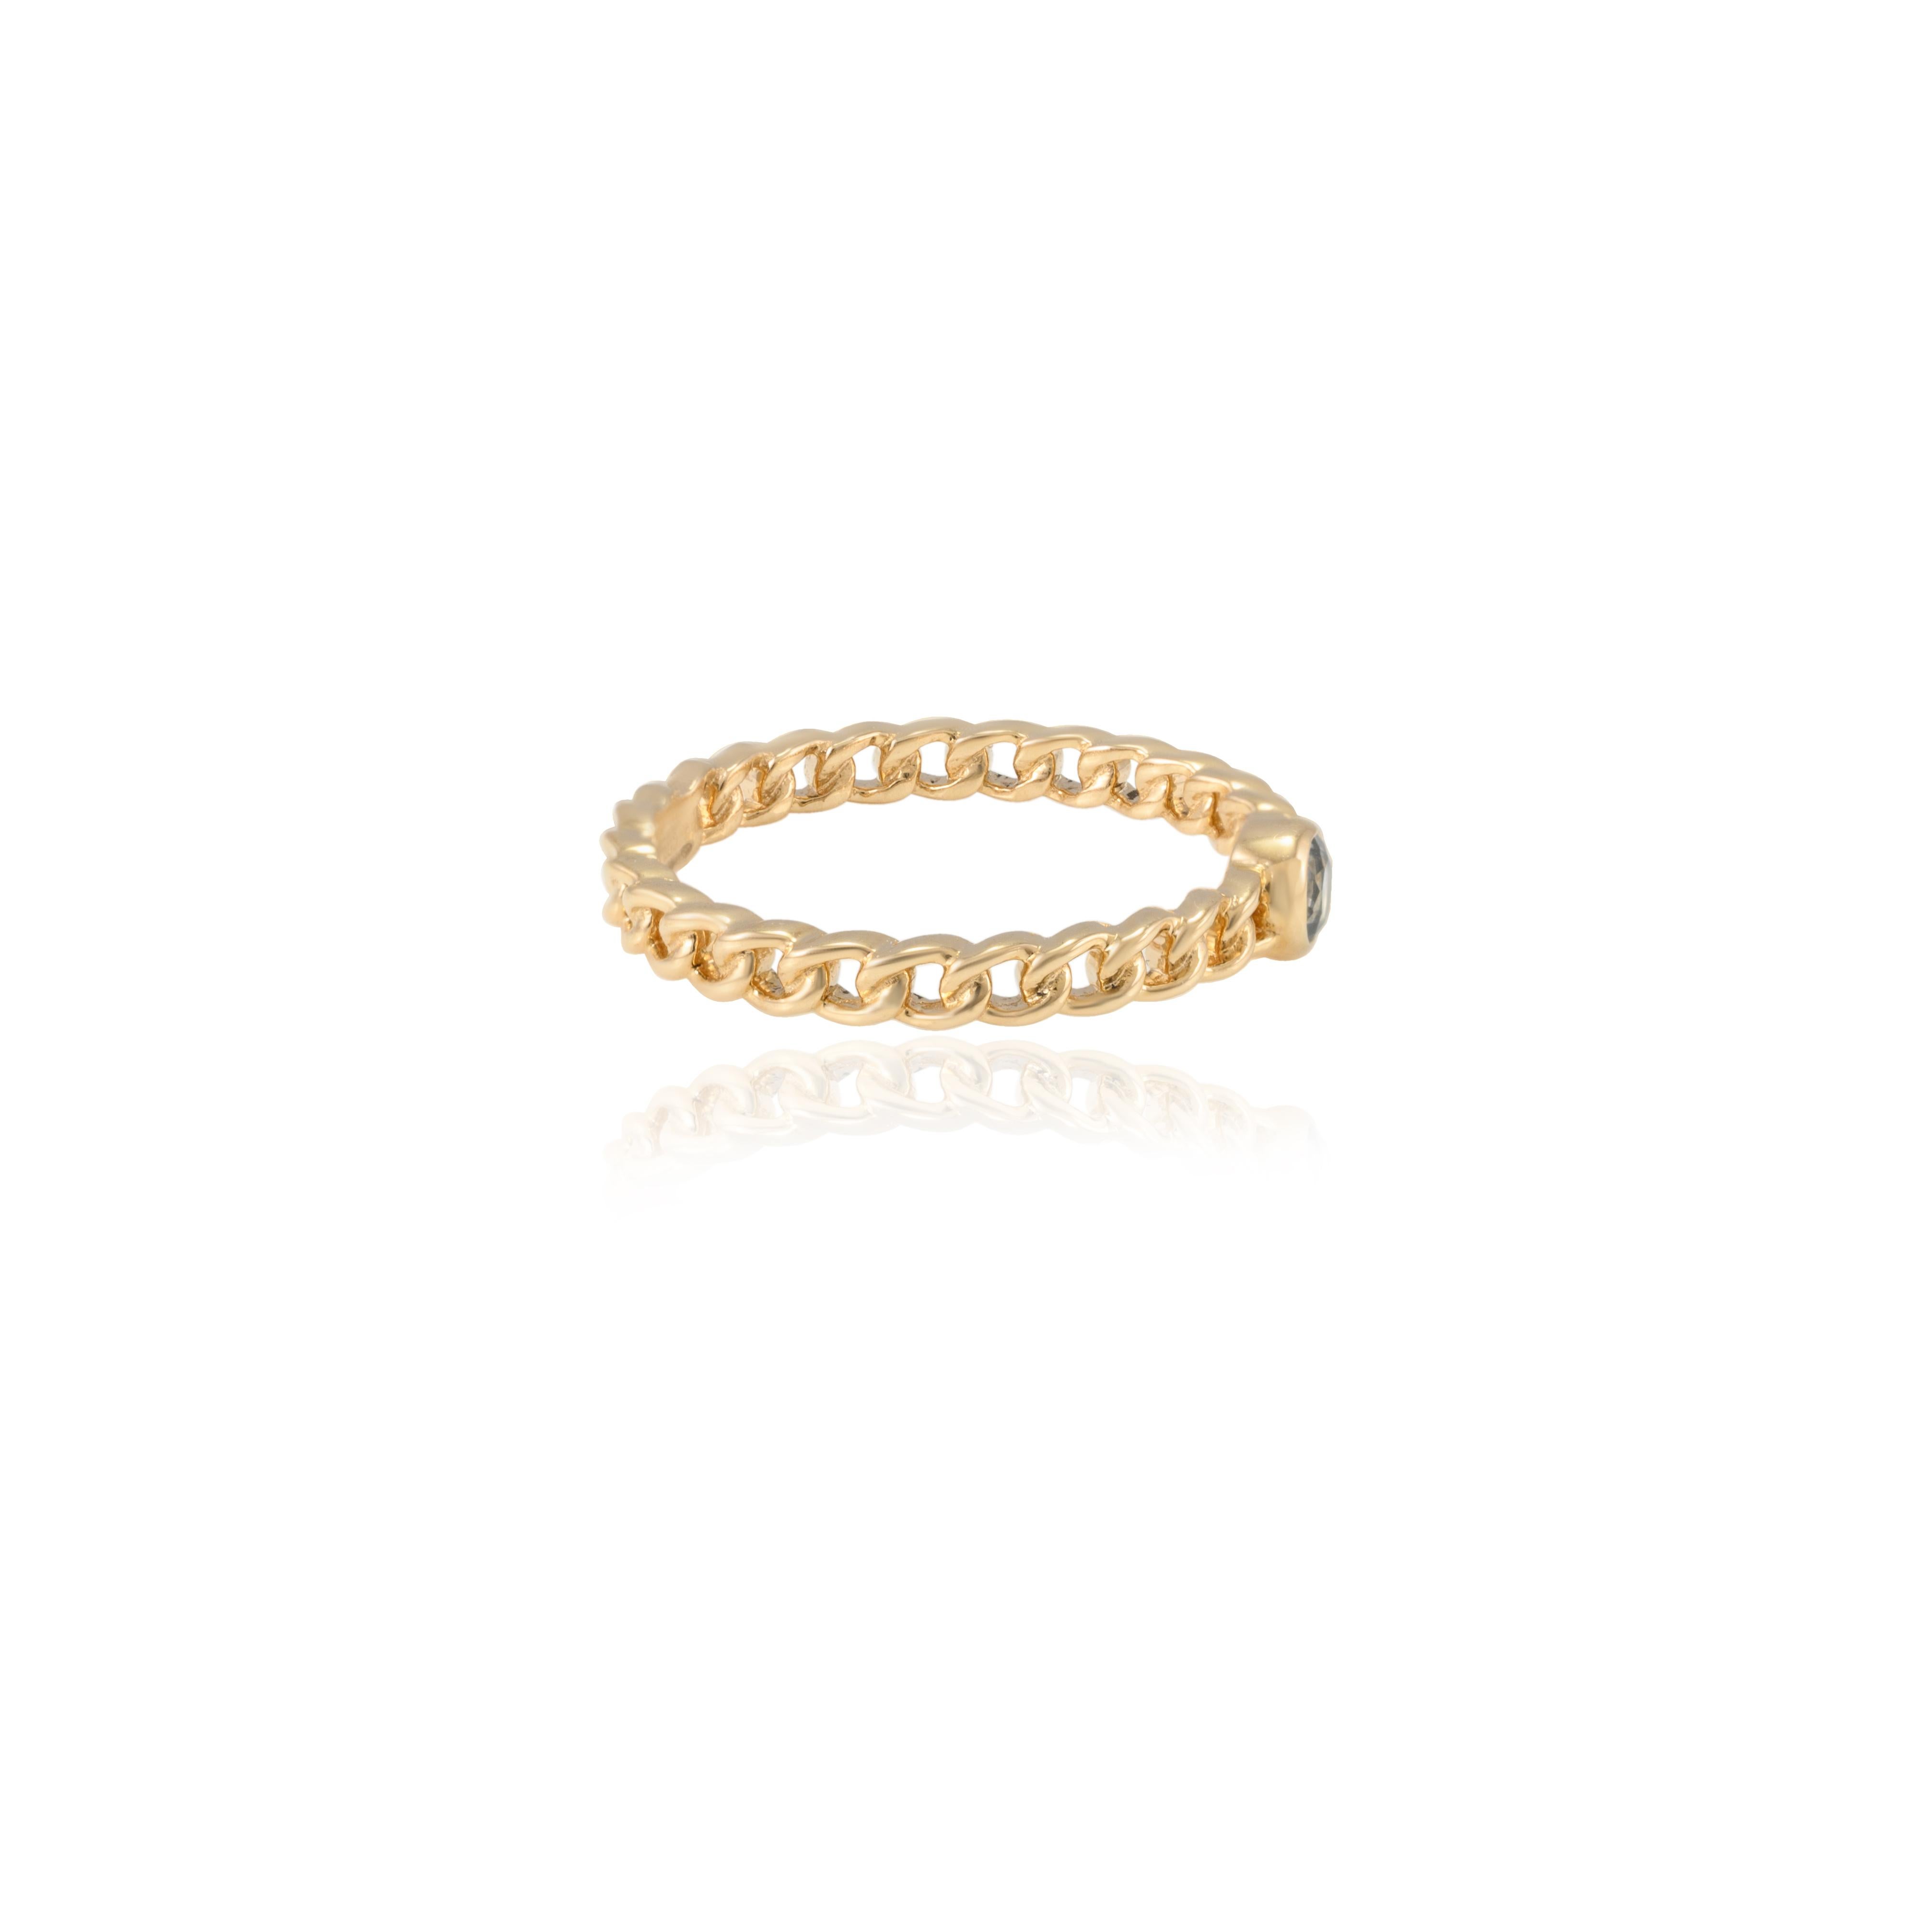 For Sale:  Everyday Blue Topaz Solitaire Curb Chain Ring in 14k Solid Yellow Gold For Her 8